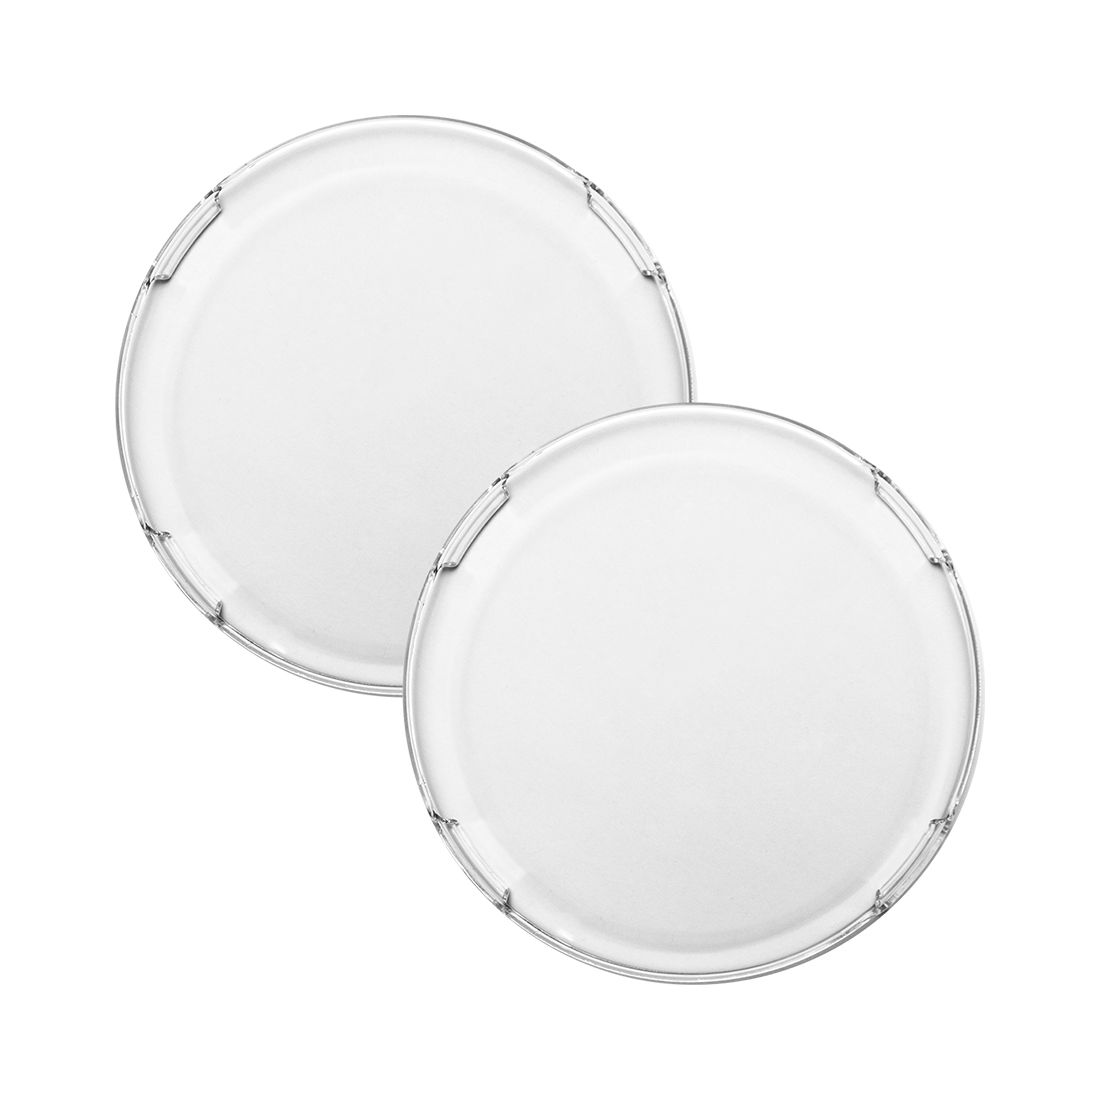 Rigid 360-Series 6" (Round) / Light Covers (Sold in PAIRS) - 363661, 363662, 363664, 363665